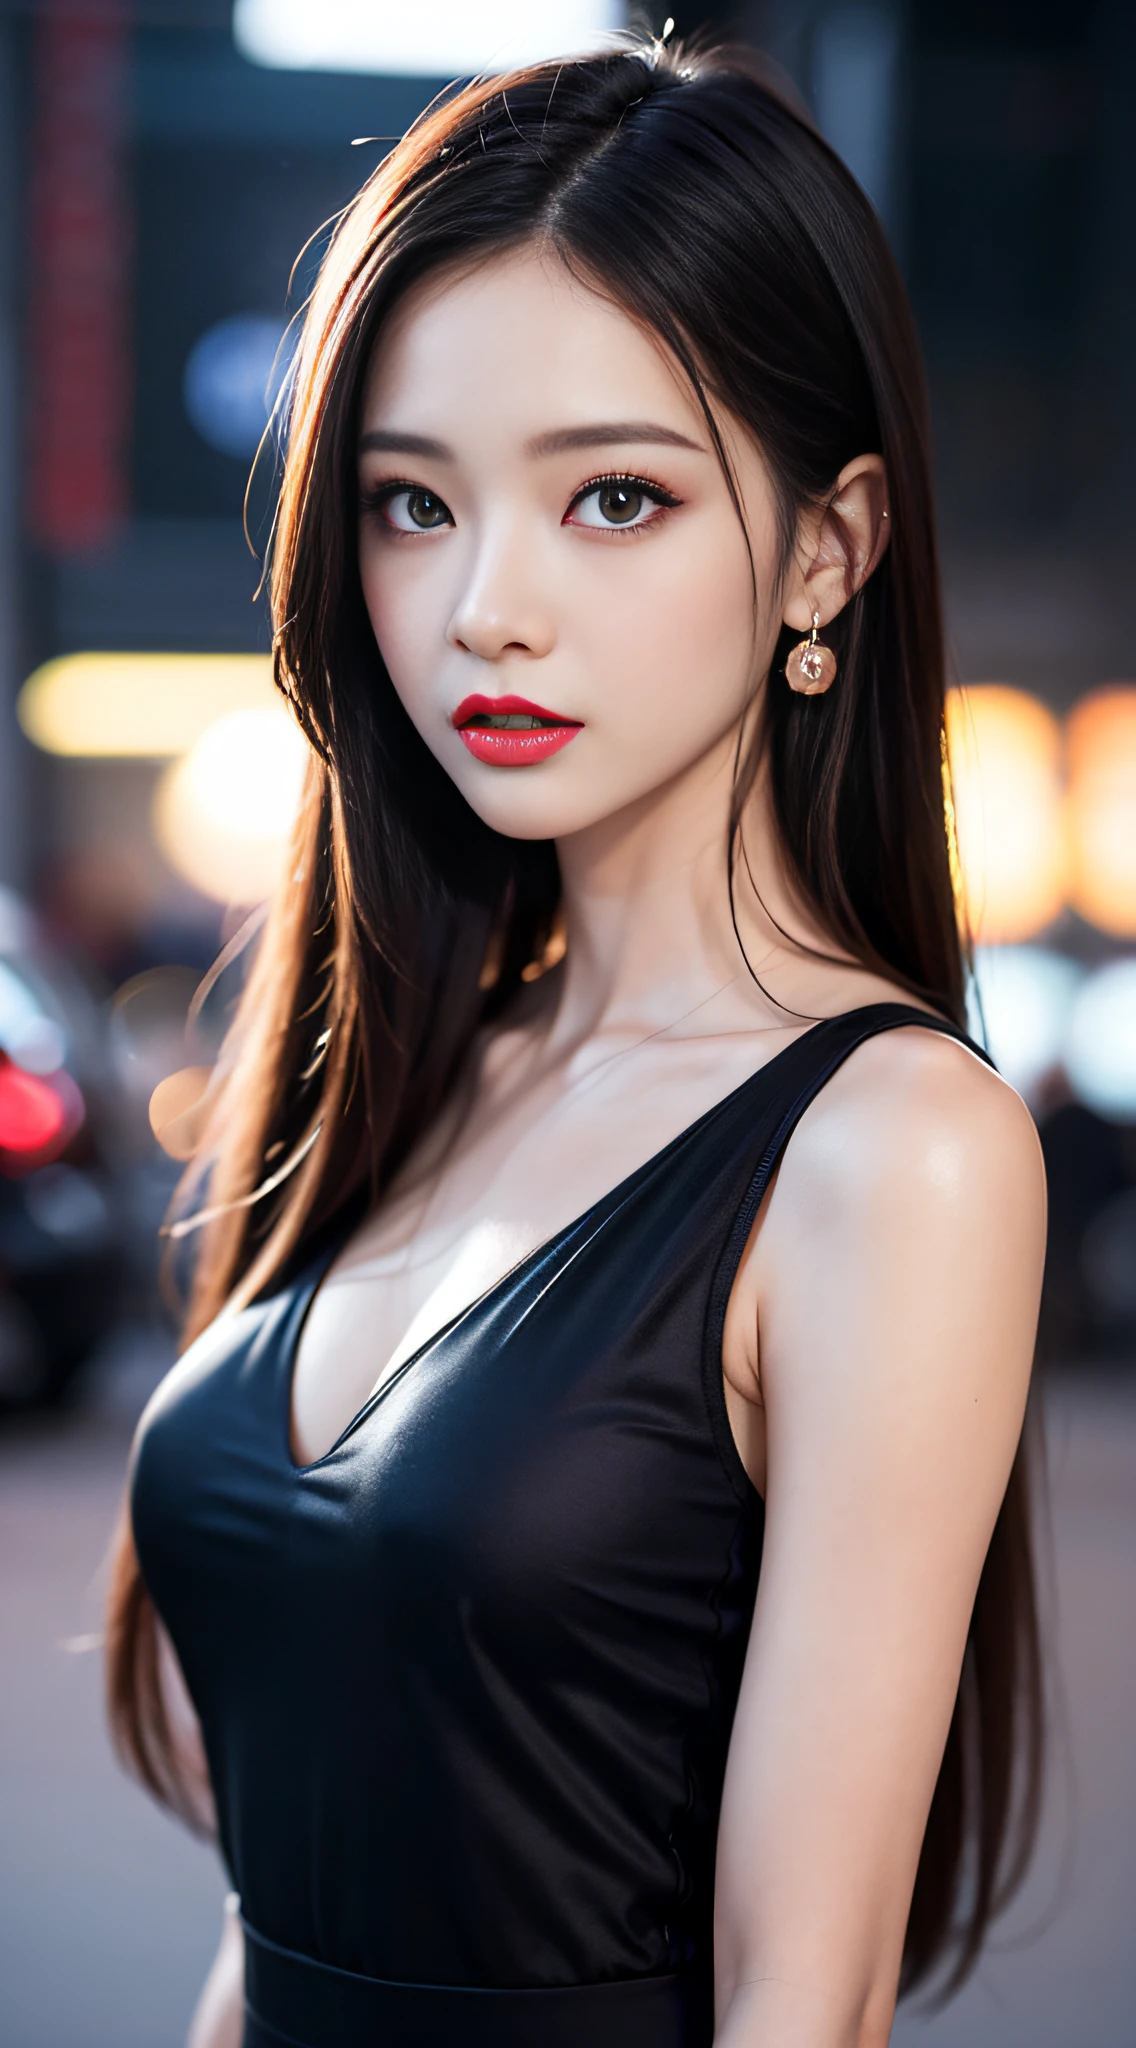 A girl, long hair, half picture, city, future, science fiction, black silk, shorts, night scene, midnight, blue light, neon, night, face close-up, delicate features, beautiful girl, beauty, charming,fashi-girl,red lips,realistic,makeup,